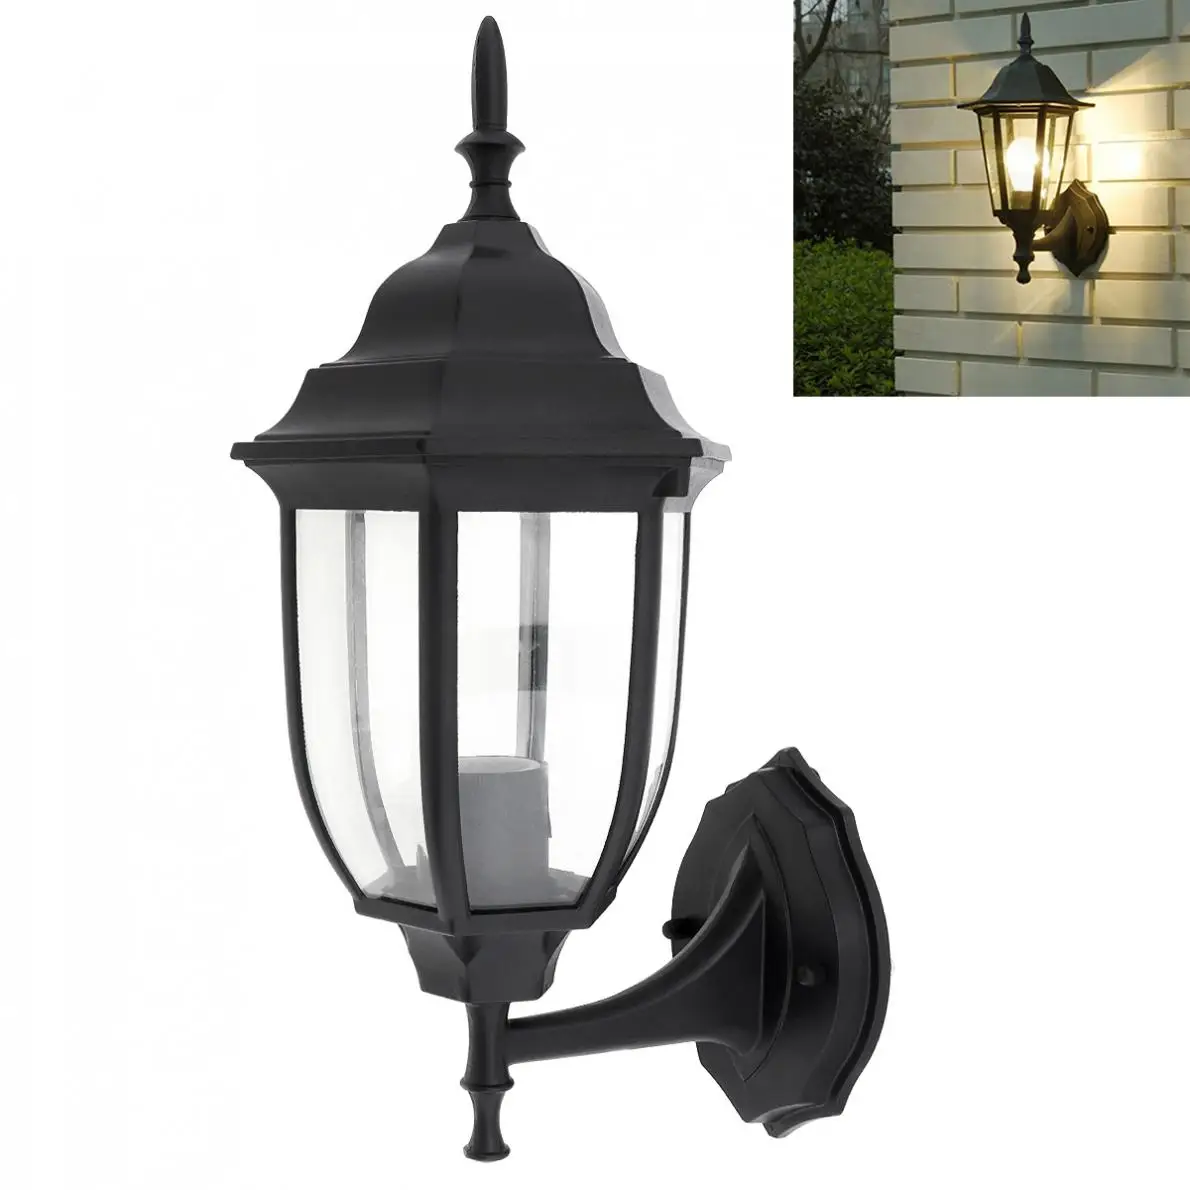 LED Lights Outdoor Security Exterior Lighting Fixtures Wall Garage Front Porch 